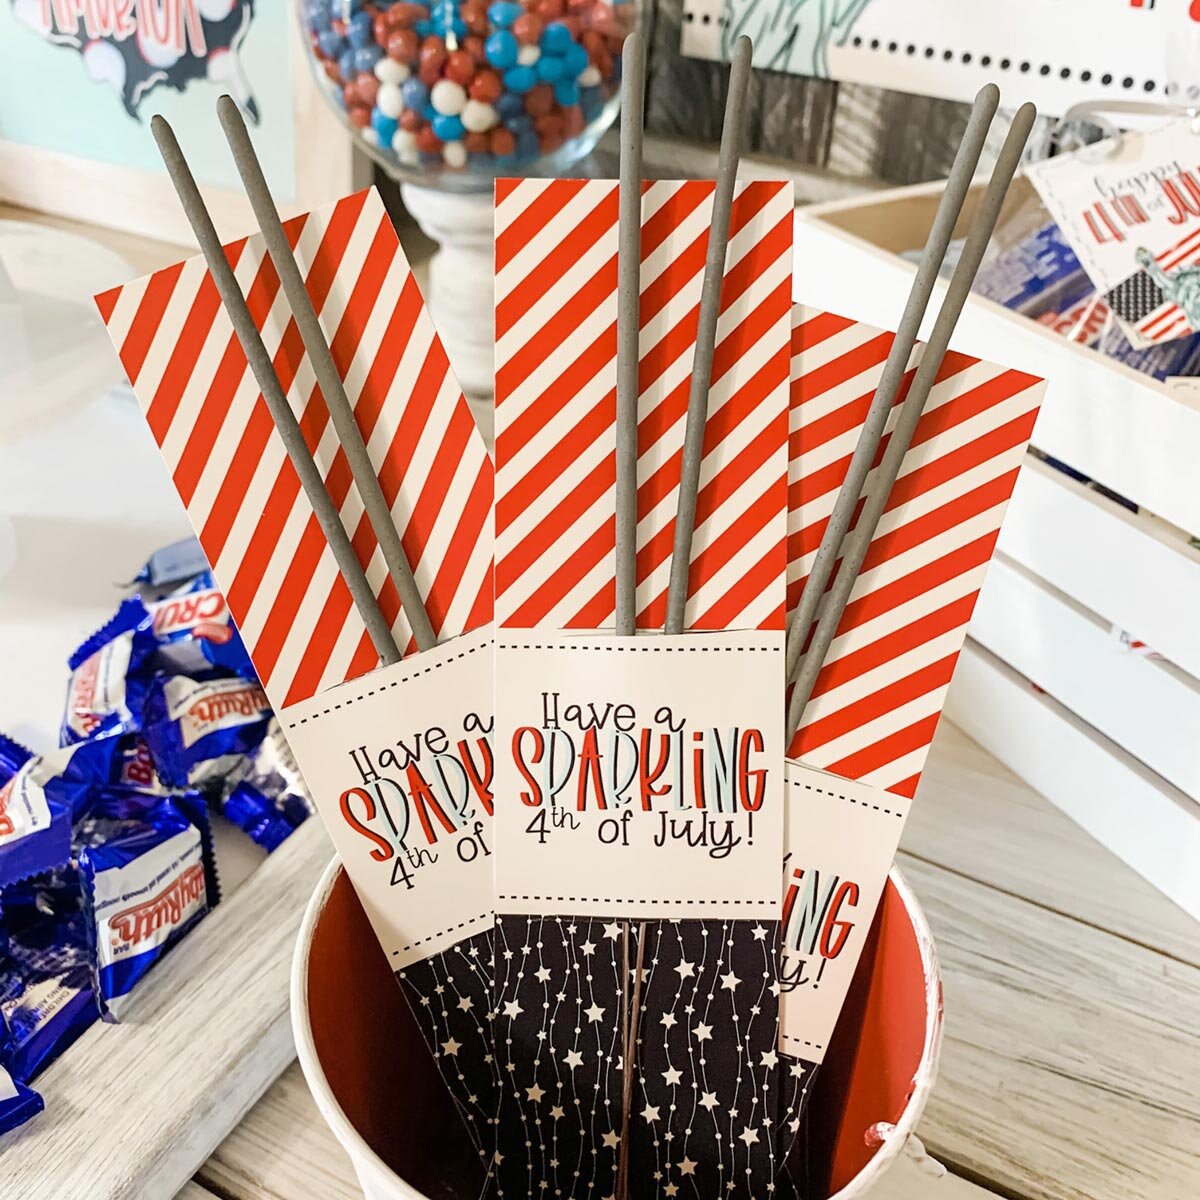 July 4th Party Ideas & Decorations picture